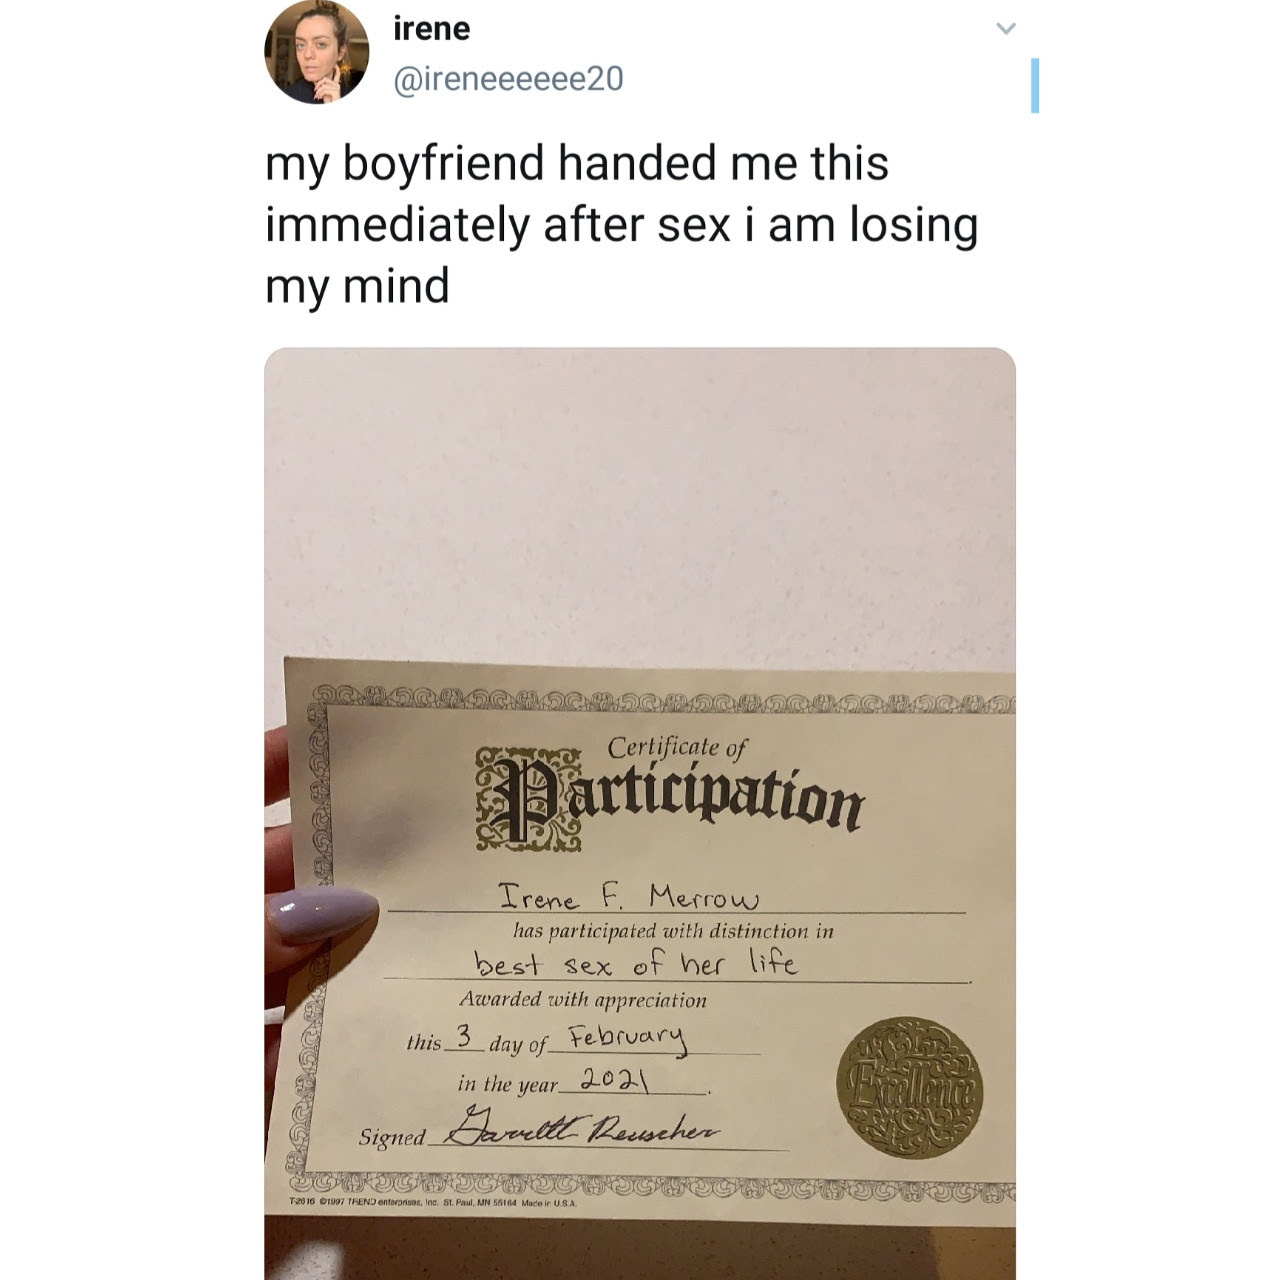 Woman receives certificate from her boyfriend immediately after sexual intercourse 